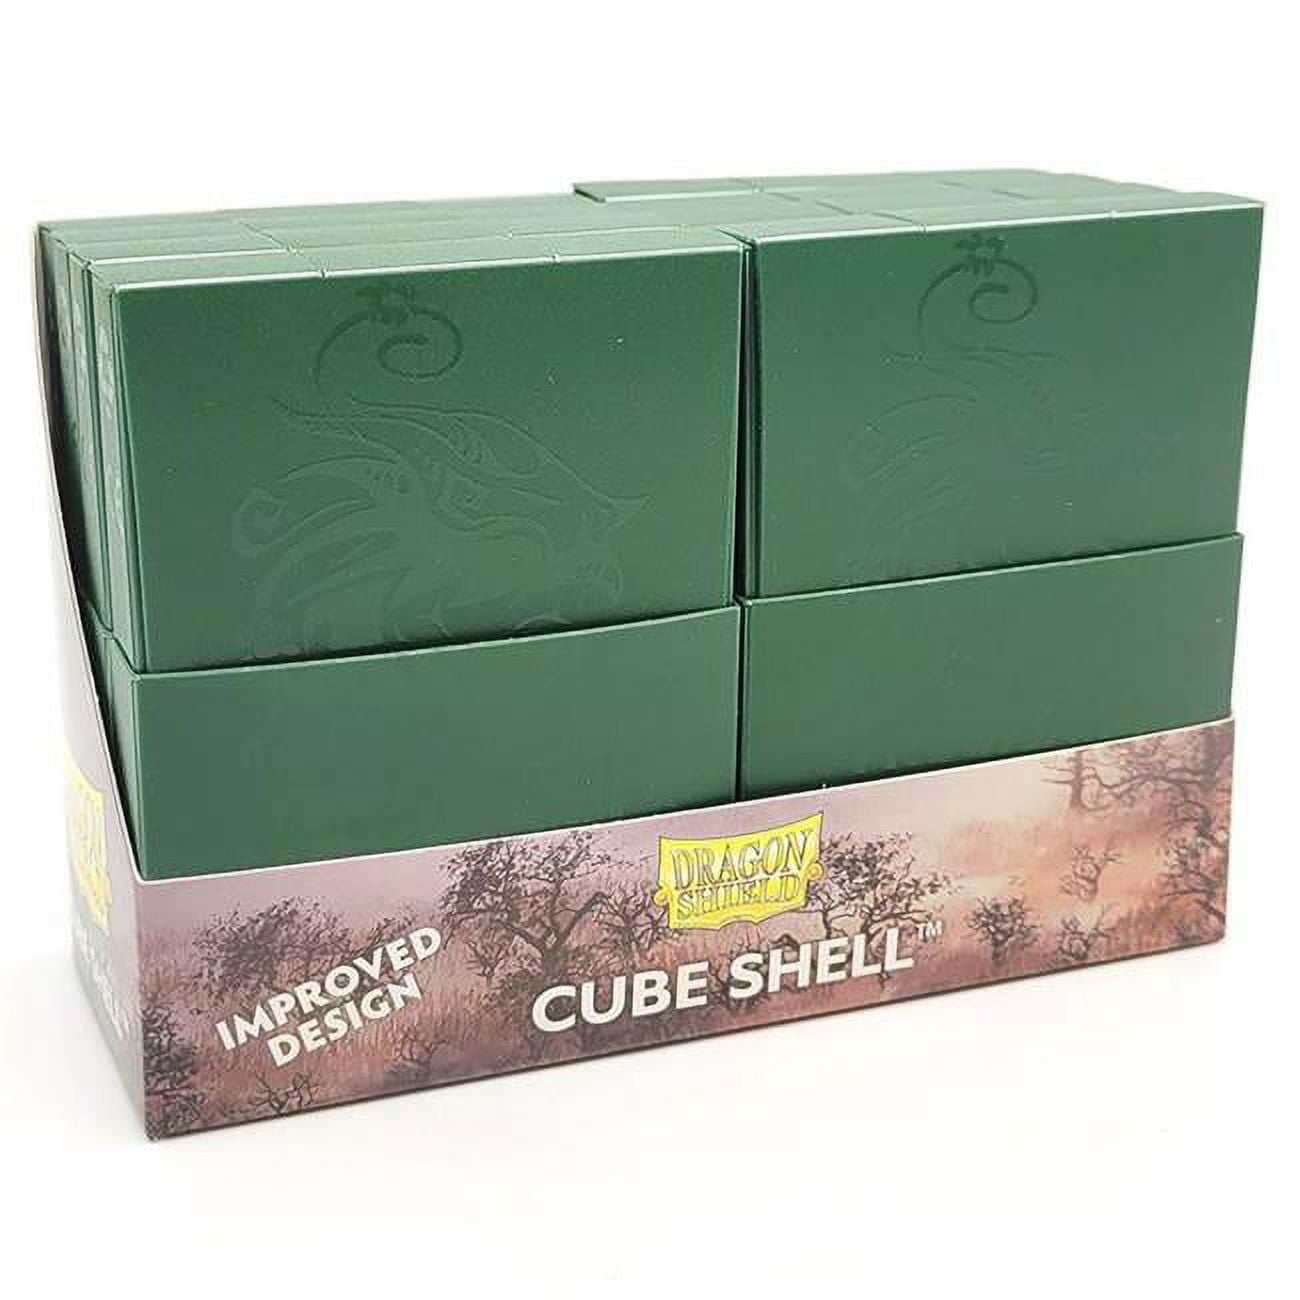 Picture of Arcane Tinmen ATM30551 Cube Shell Card Deck Box, Forest Green - 8 Piece